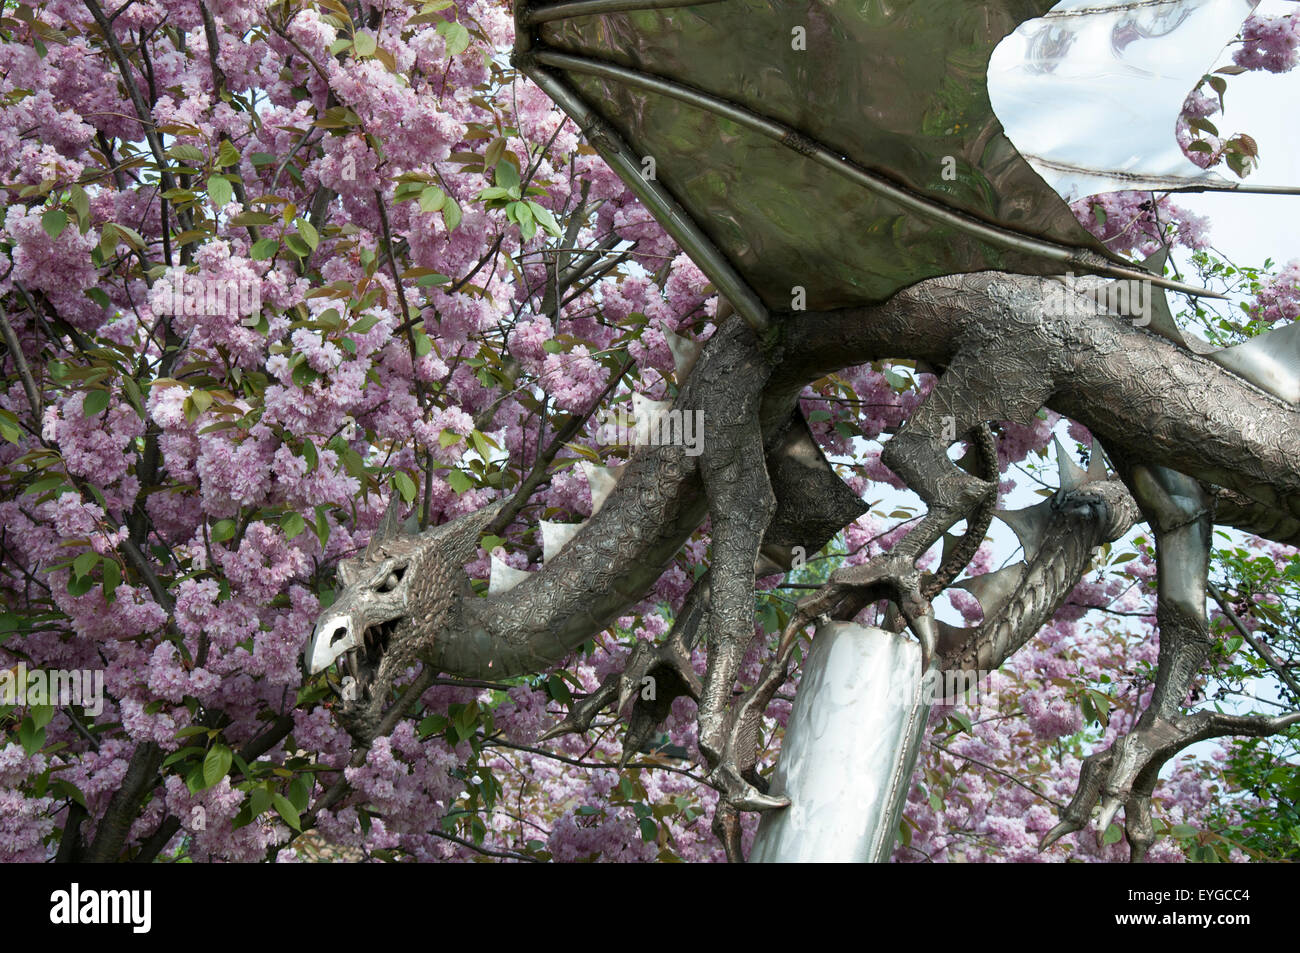 The Sneinton Dragon surrounded by pink spring blossom, Nottinghamshire England UK Stock Photo